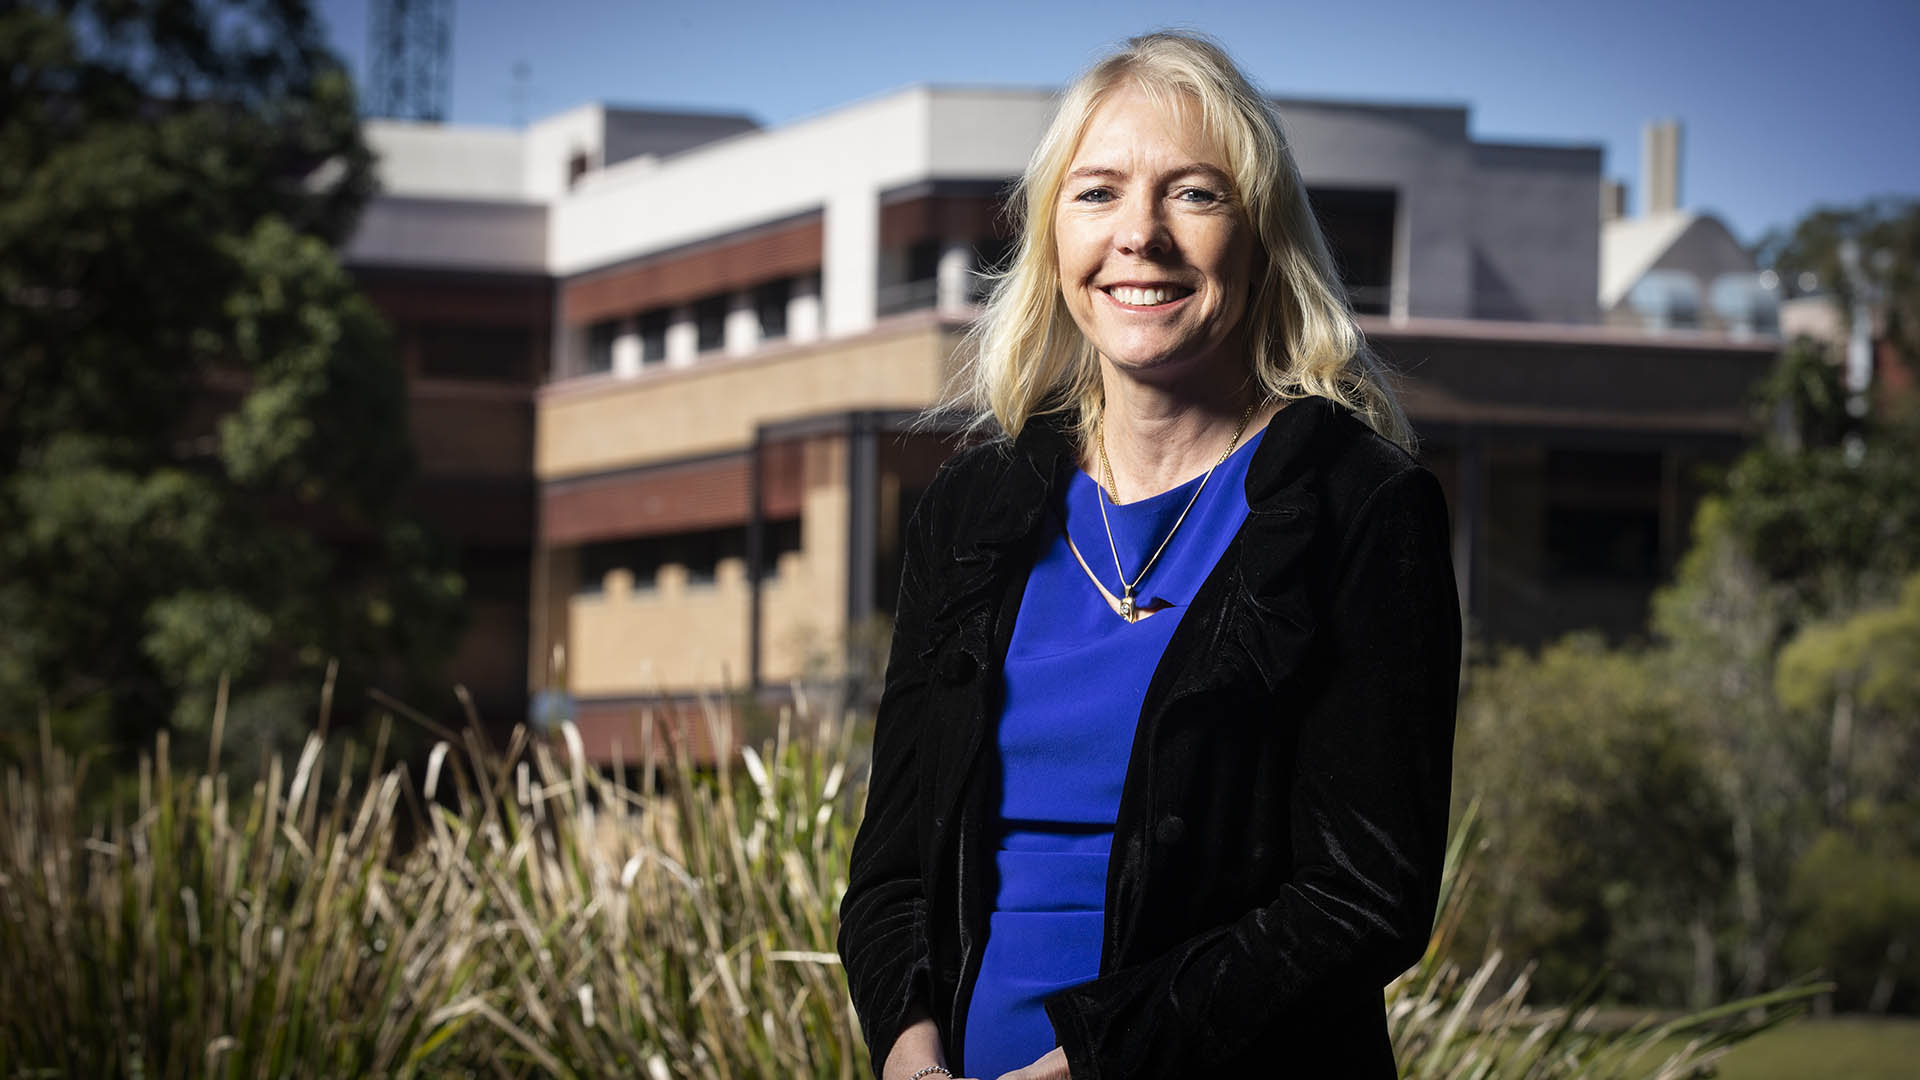 Professor Karen Charlton on the University of Wollongong campus. Professor Charlton, from the School of Medical, Indigenous and Health Sciences, is an internationally recognised nutrition scientist